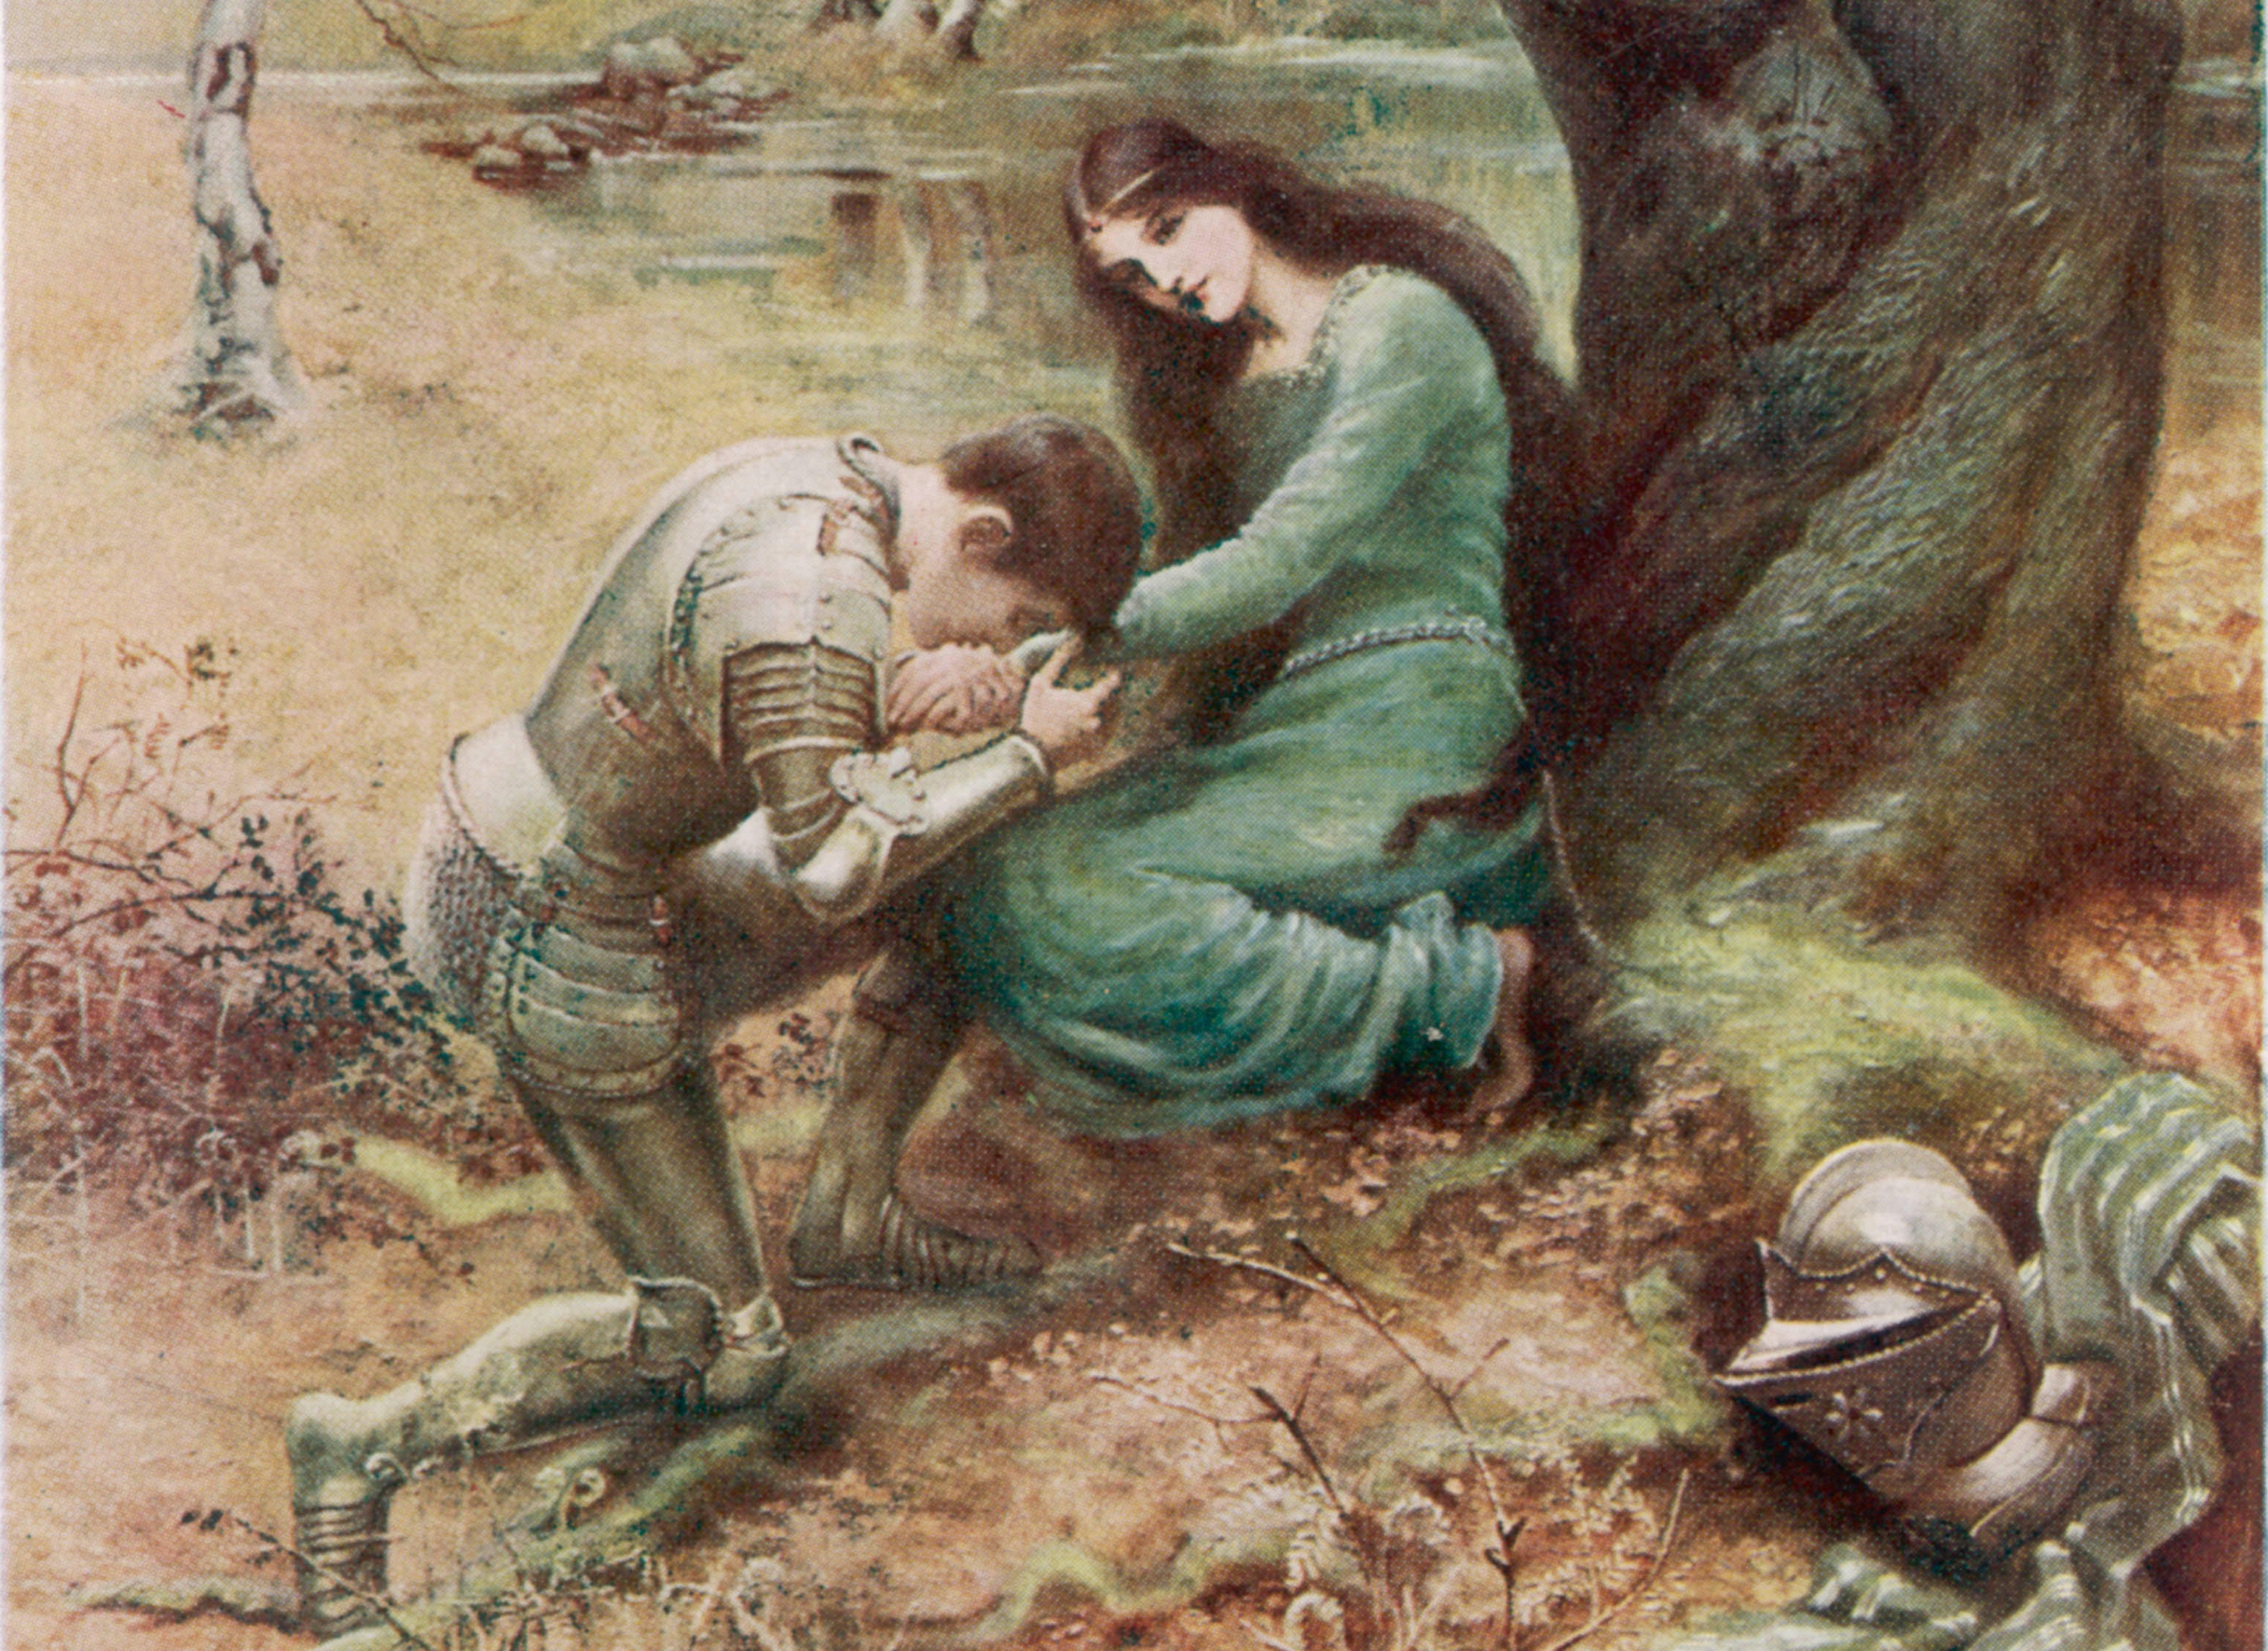 A medieval Knight, with his  young lover, gets down on one  knee...        Date: First published: 1898